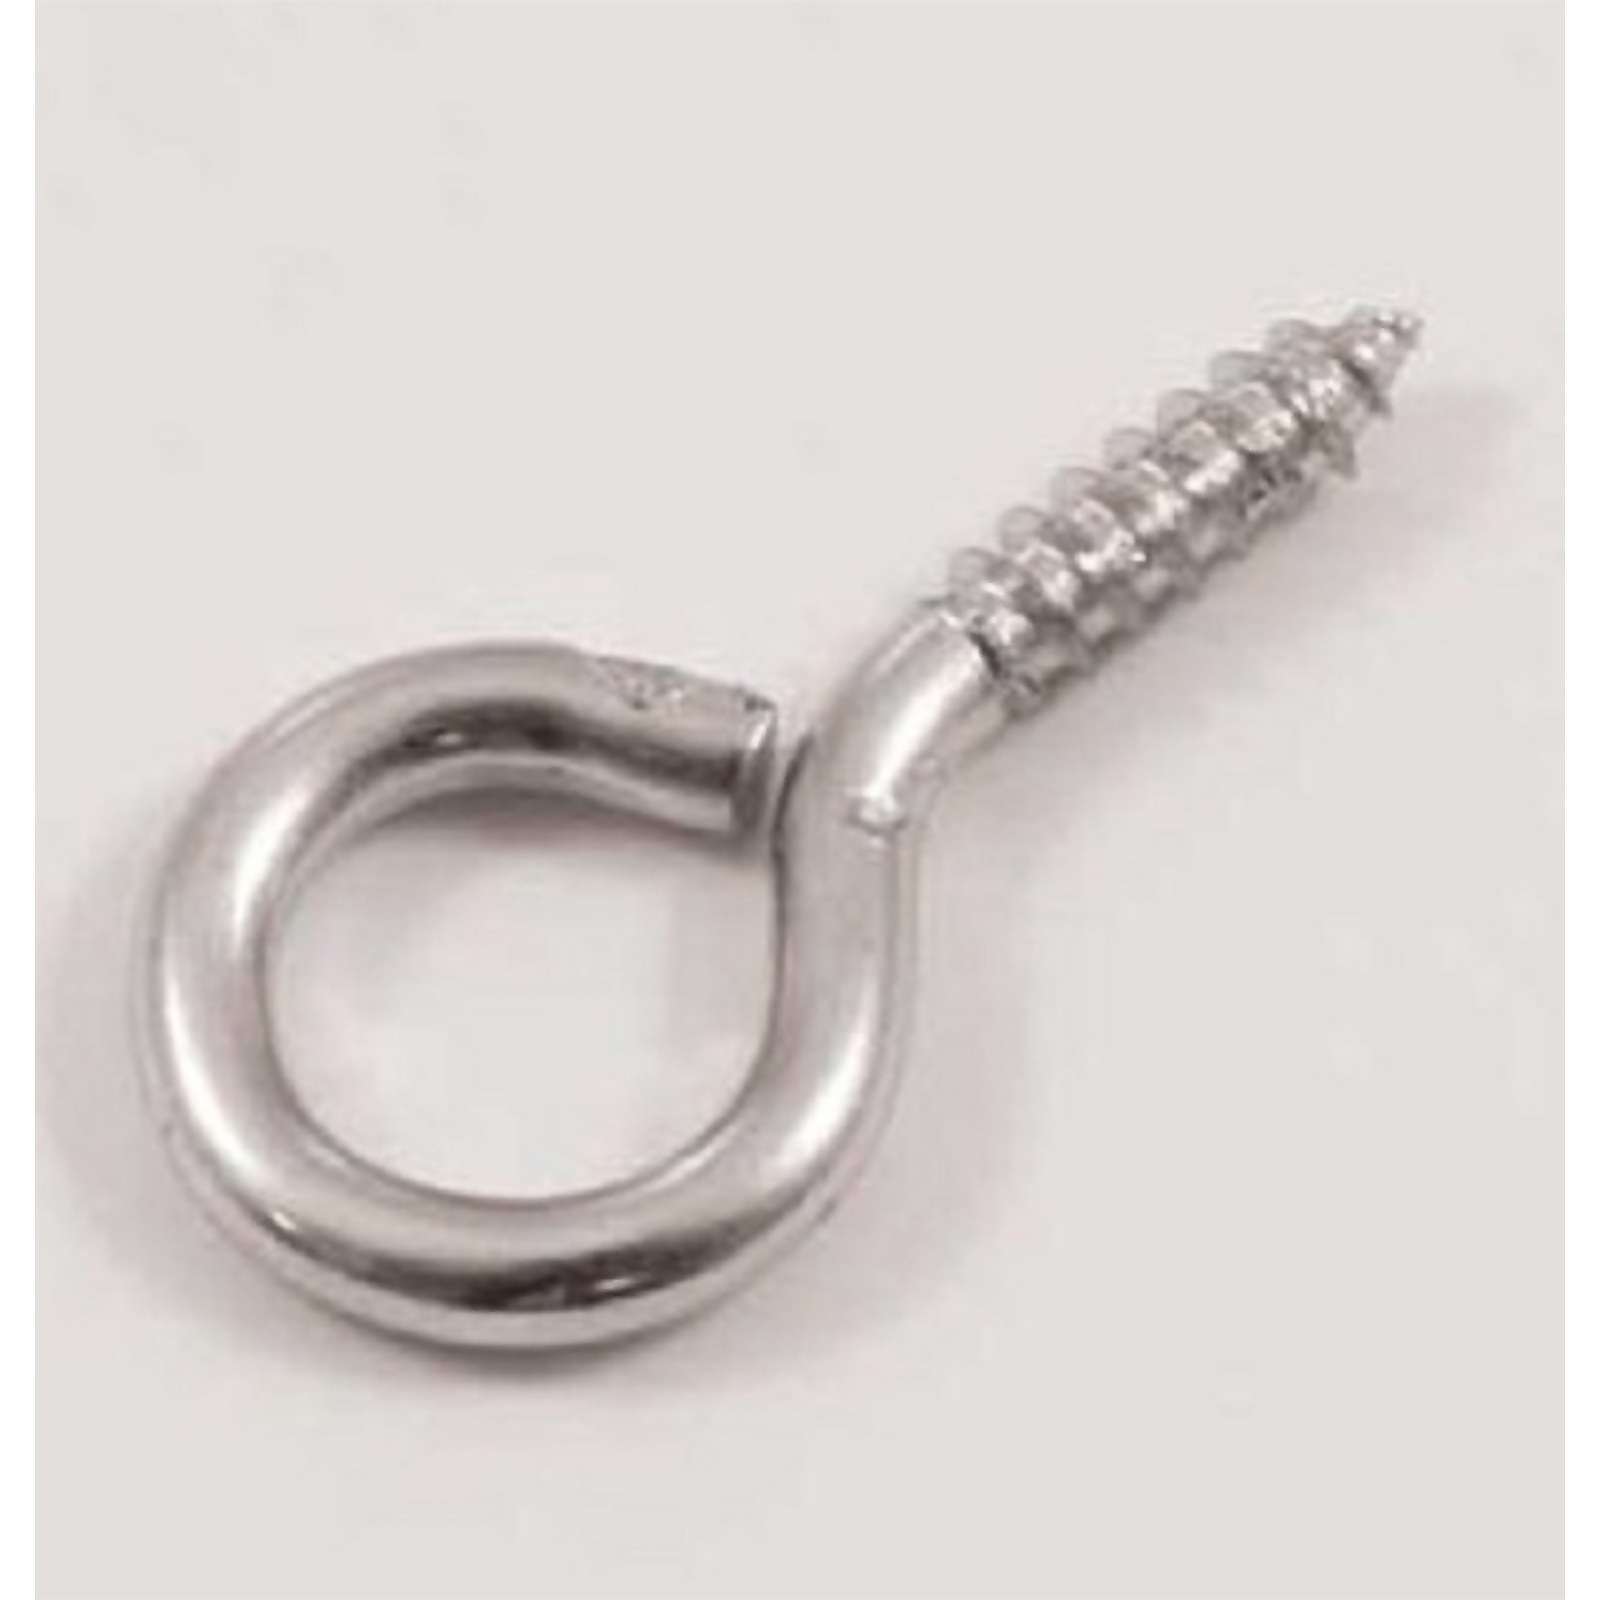 Photo of Screw Eyes - Zinc Plated - 30mm - 8 Pack